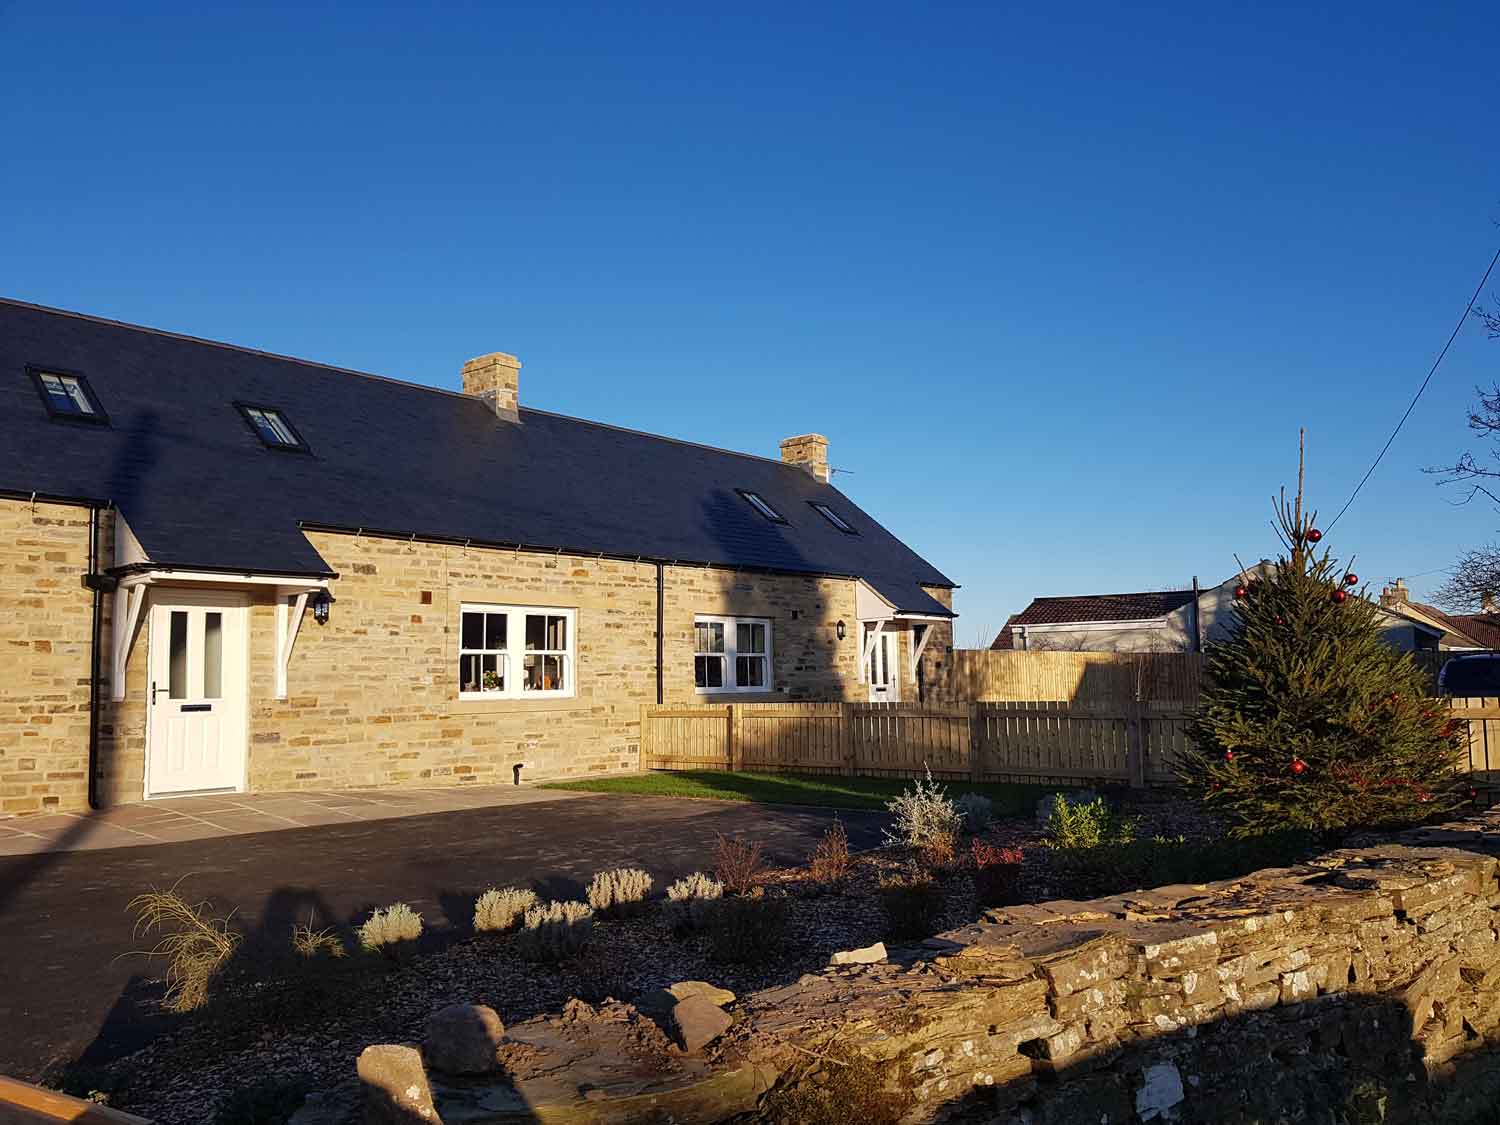 The new community led homes in Hudswell, which opened in December 2017